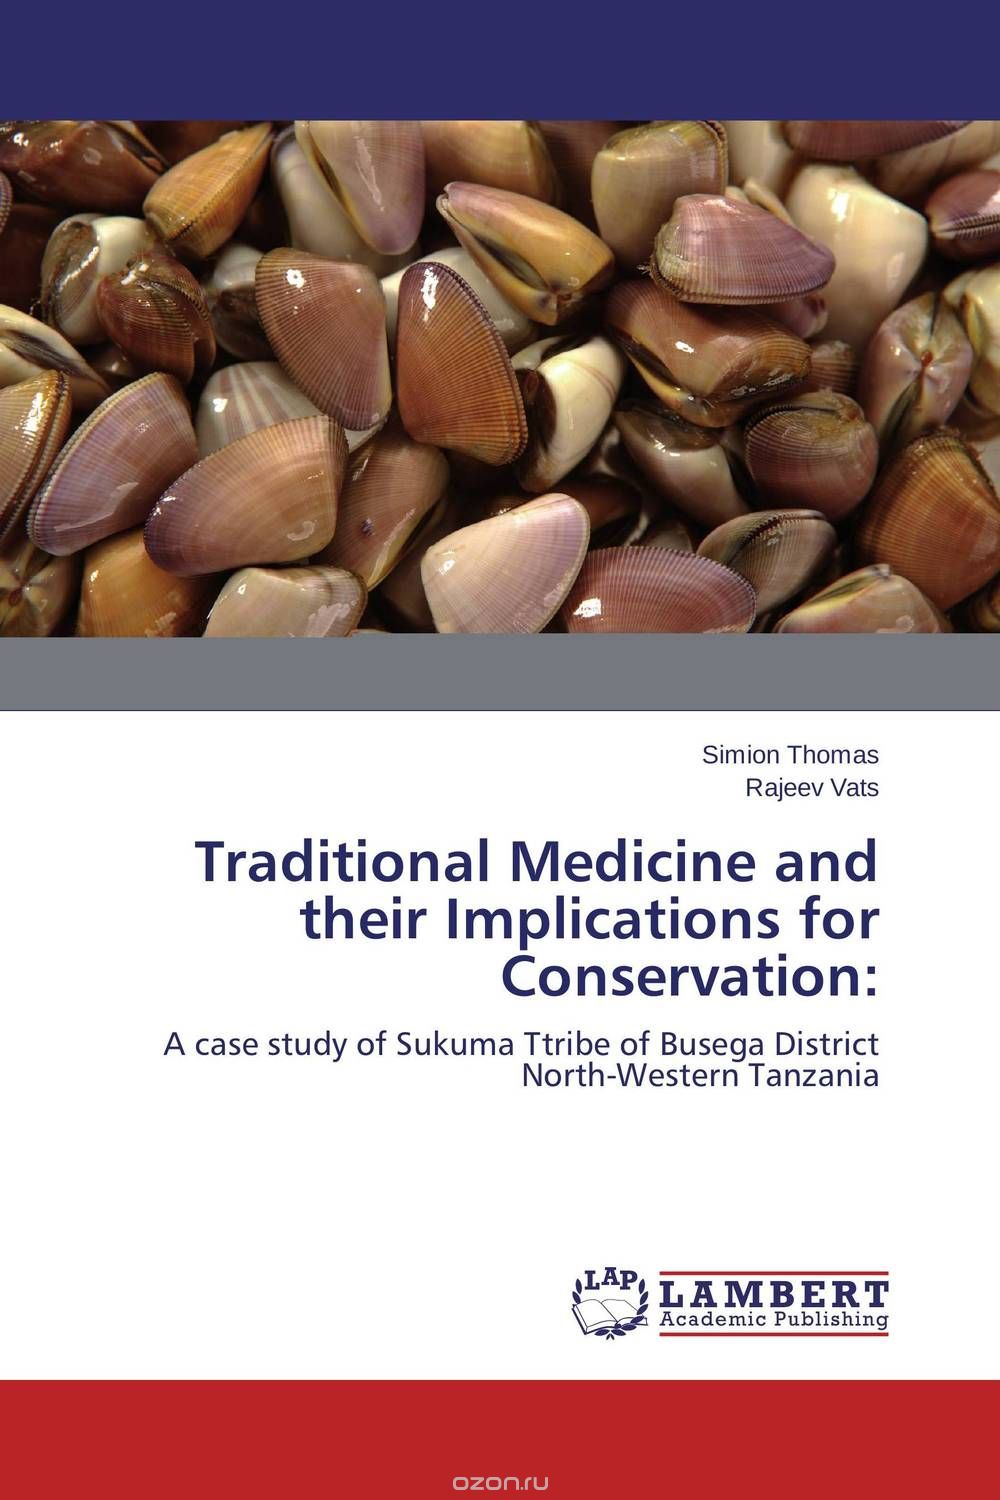 Traditional Medicine and their Implications for Conservation